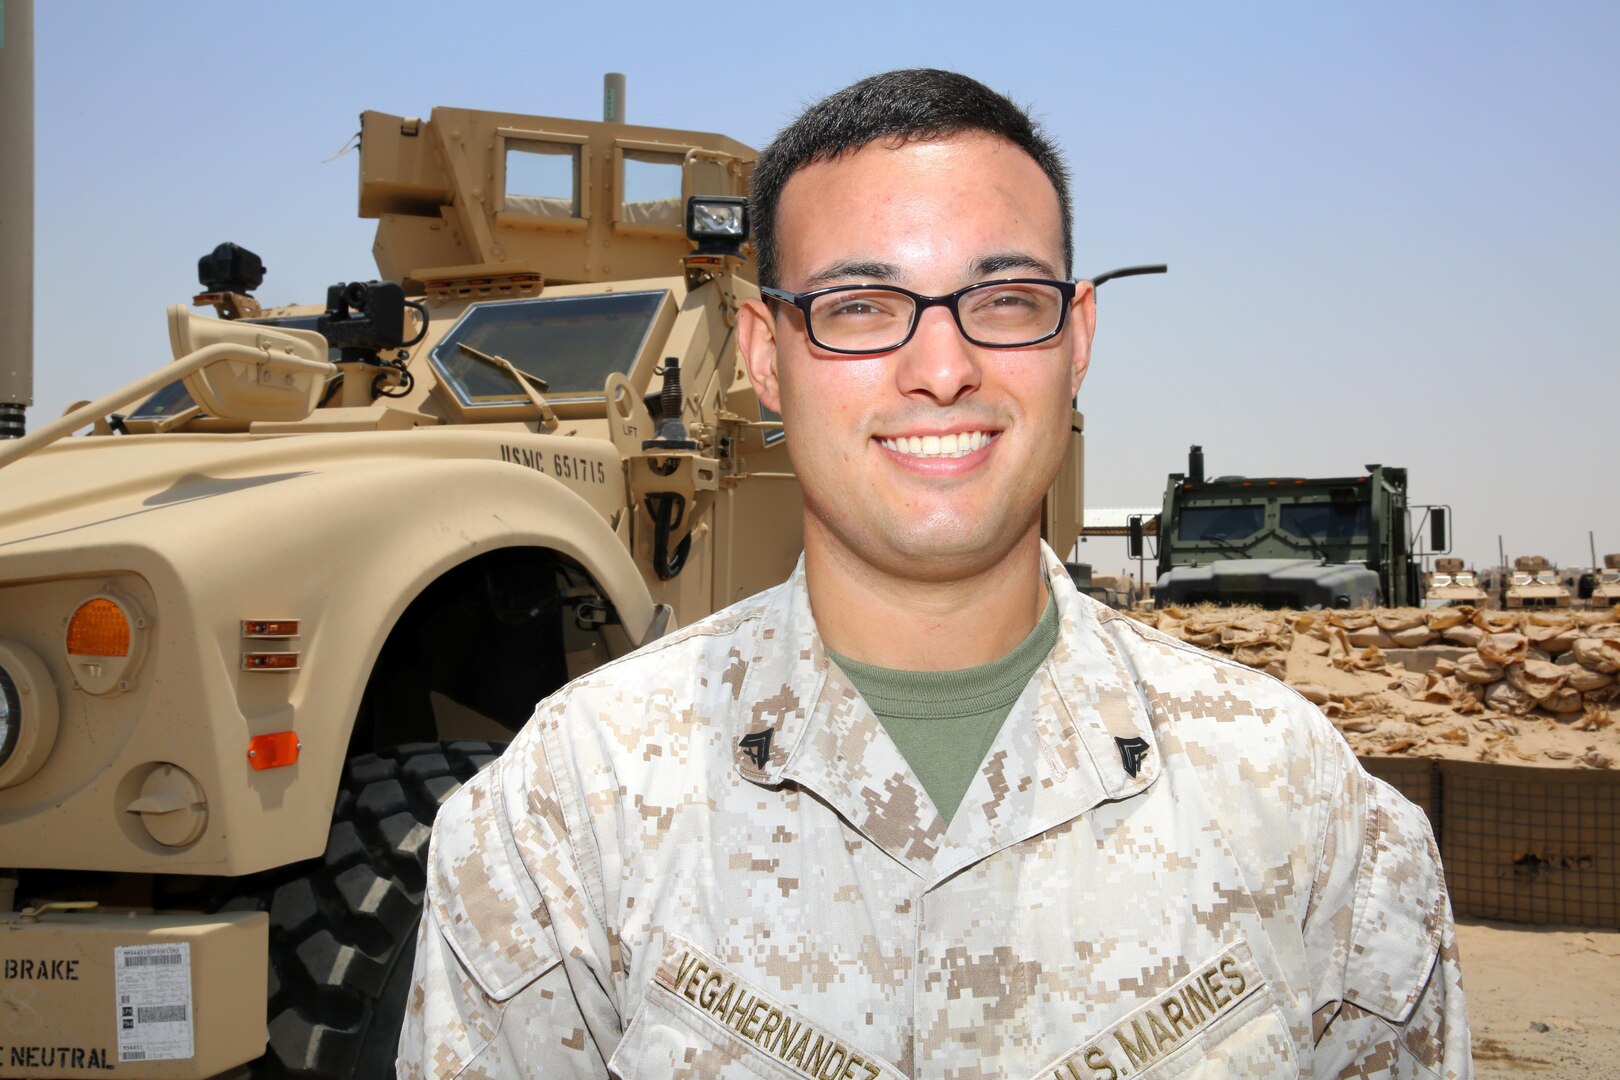 U.S. Marine Cpl. Ernesto VegaHernandez, of Kendall, Fla., is currently forward deployed as a motor transportation mechanic with Combat Logistics Battalion 5, Special Purpose Marine Air Ground Task Force – Crisis Response – Central Command. SPMAGTF – CR – CC is a self-sustaining expeditionary unit, designed to provide a broad range of crisis response capabilities throughout the Central Command area of responsibility, using organic aviation, logistical, and ground combat assets. Vega was a part of a select group of mechanics and communications maintainers from the unit who conducted joint limited technical inspections of recently refurbished Mine-Resistant Ambush Protected vehicles being shipped into countries like Iraq, where Marines are supporting Iraqi Security Forces in the fight against the Islamic State of Iraq and the Levant. (Photo by SSgt. Lynn Kinney/ Released) 